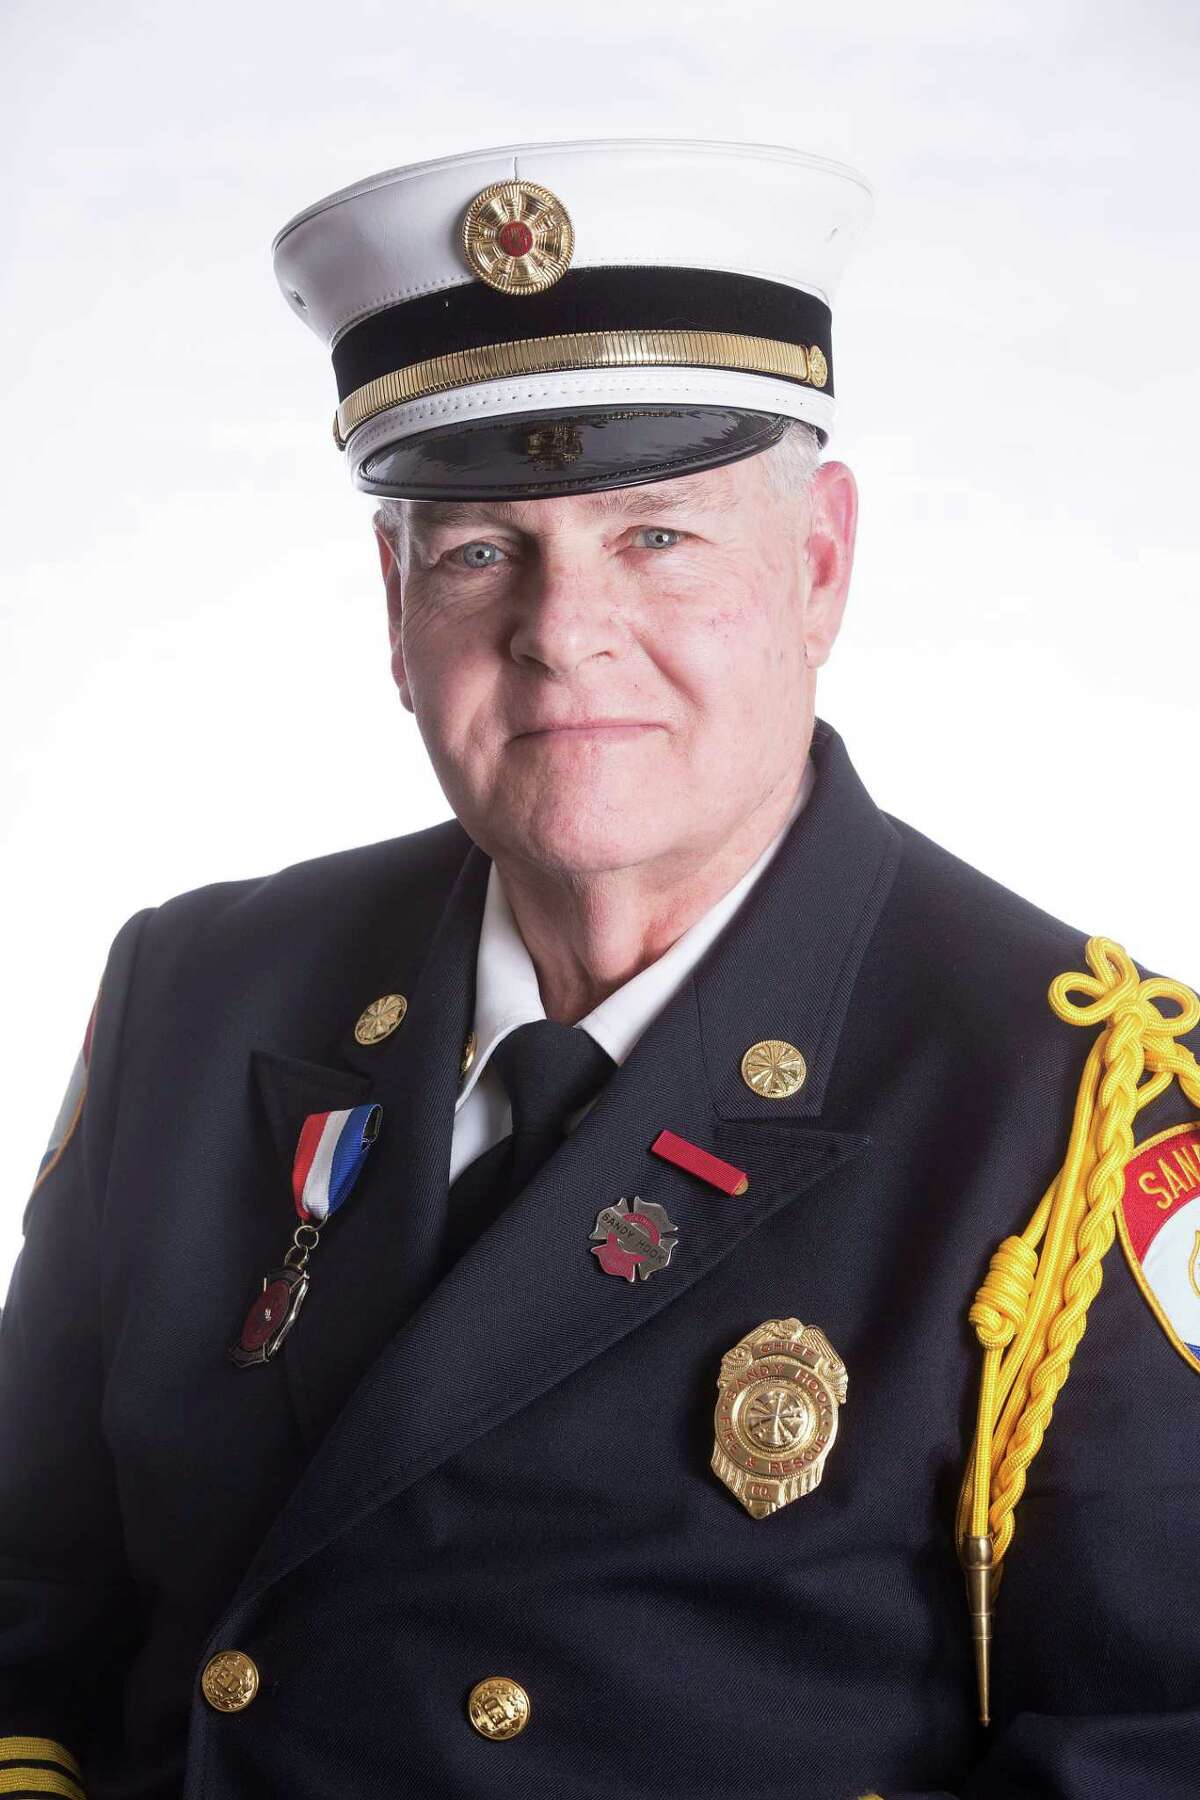 Sandy Hook Volunteer and Rescue Fire Chief William Halstead died Friday, July 8, 2022, shortly after returning home from a call.